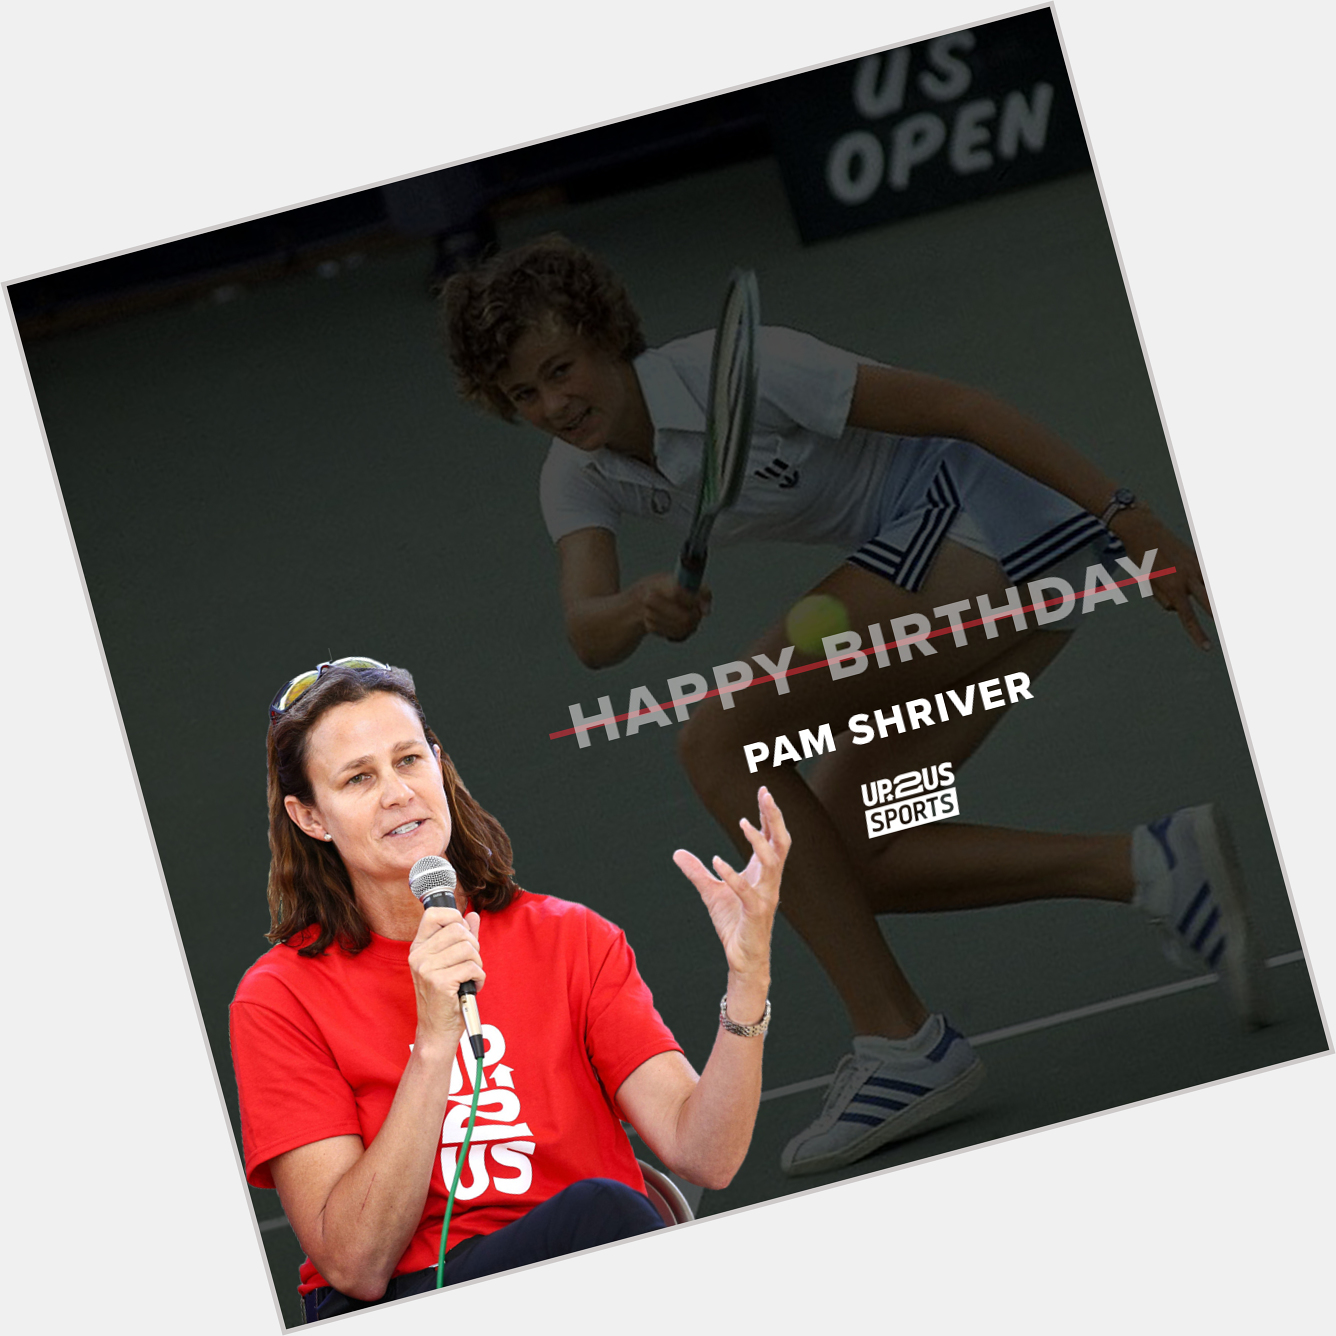 Wishing our Pam Shriver ( a very happy birthday!  